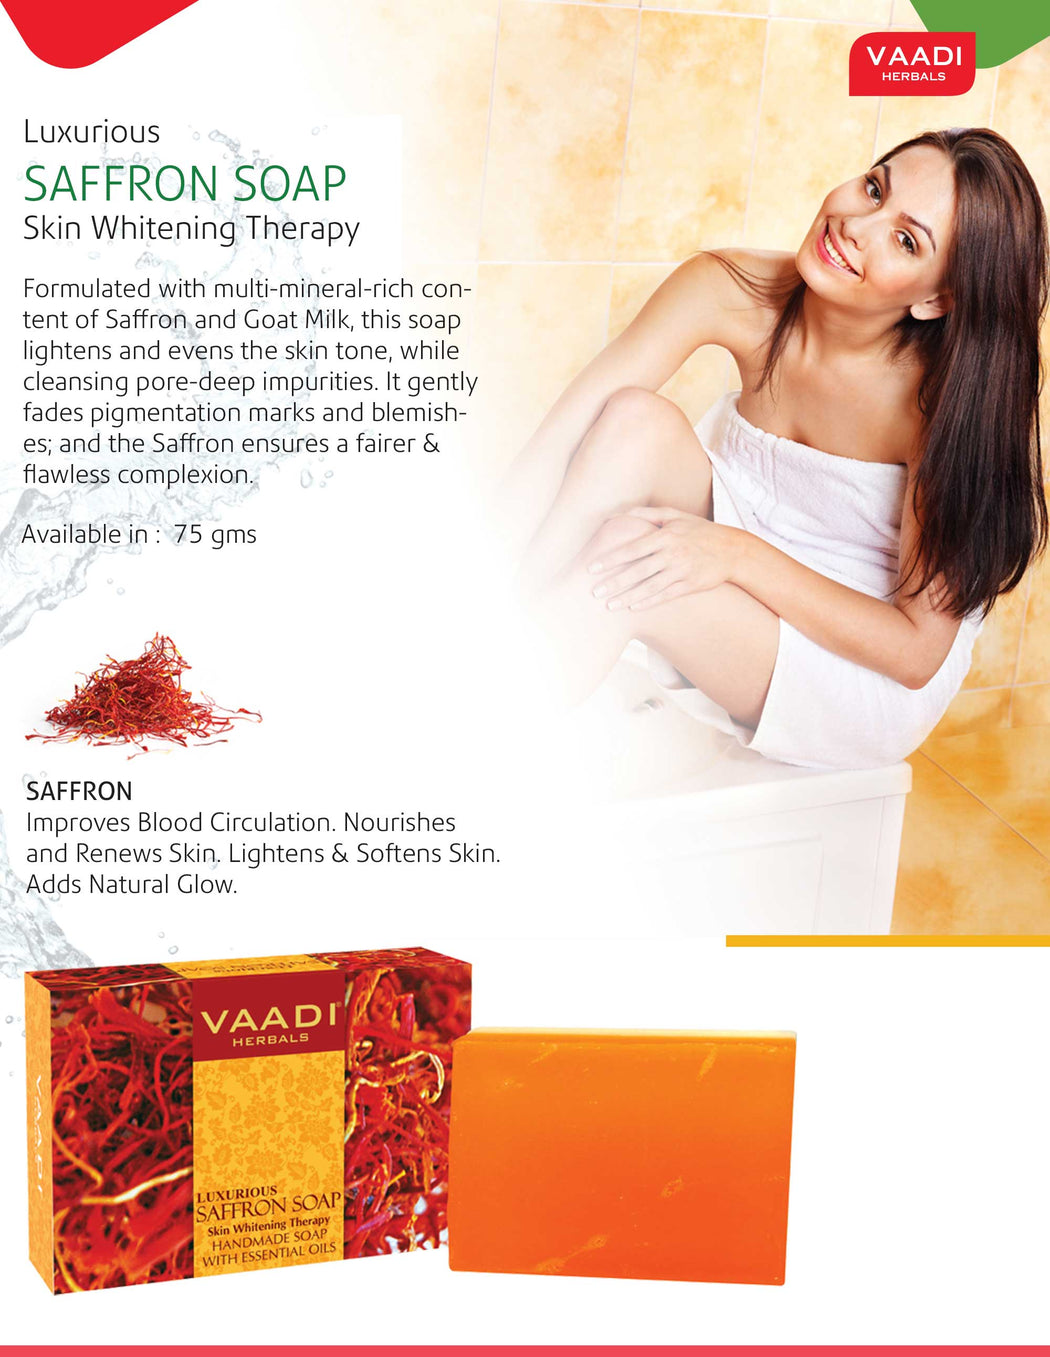 Pack of 6 Luxurious Saffron Soap - Skin Whitening Therapy (75 gms x 6)